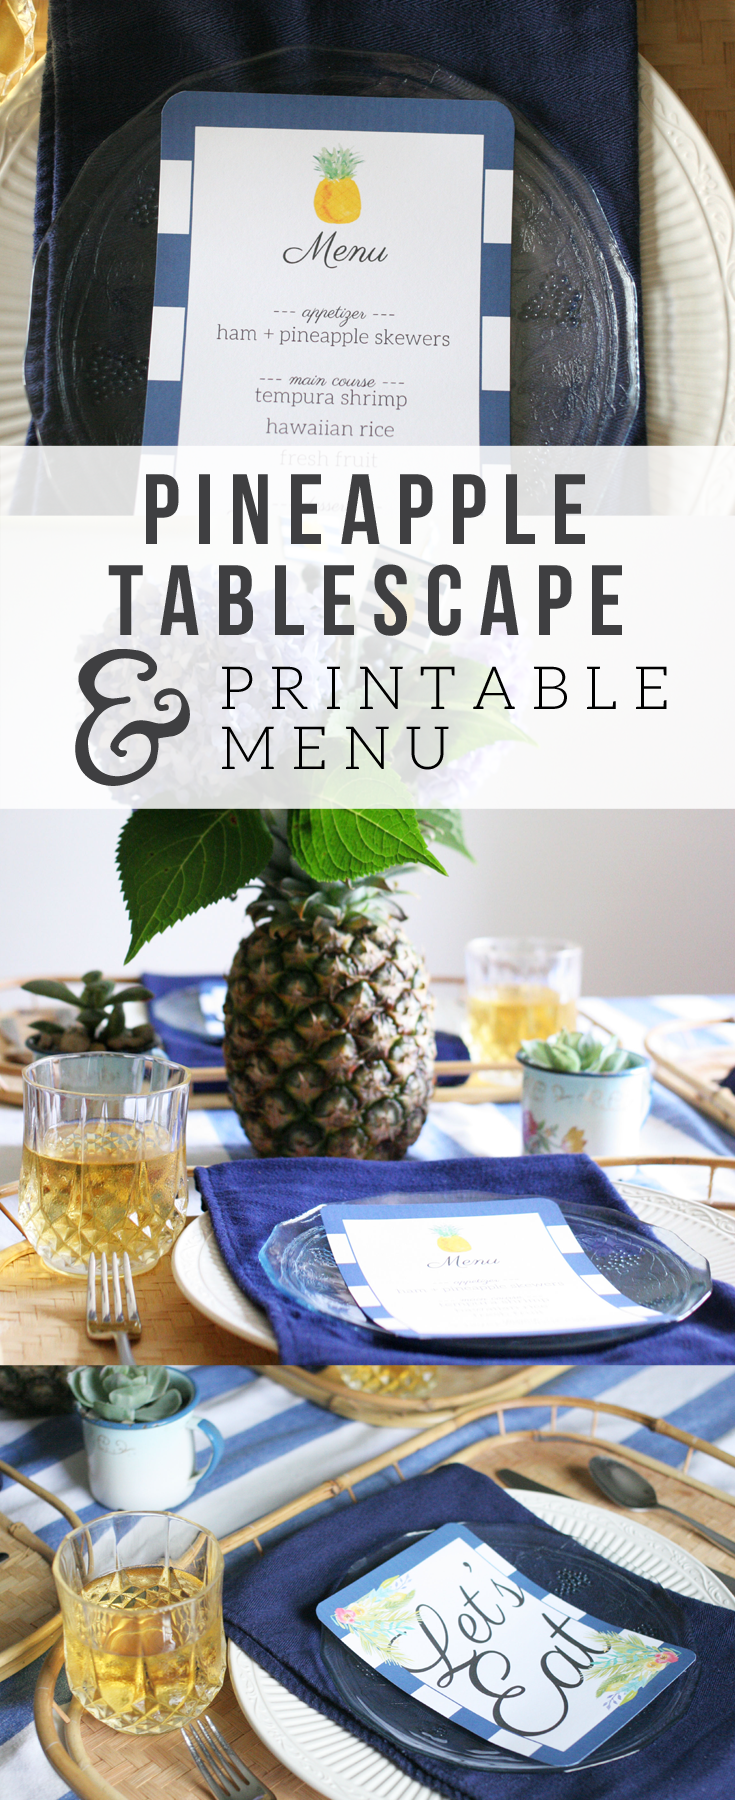 Pretty Pineapple Tablescape, Summer Party, Pineapple Party, Pineapple Menu, Printable Menu Template, Pineapple Table Setting by Craftivity Designs ---> Click the Image to Download the FREE Printable Template